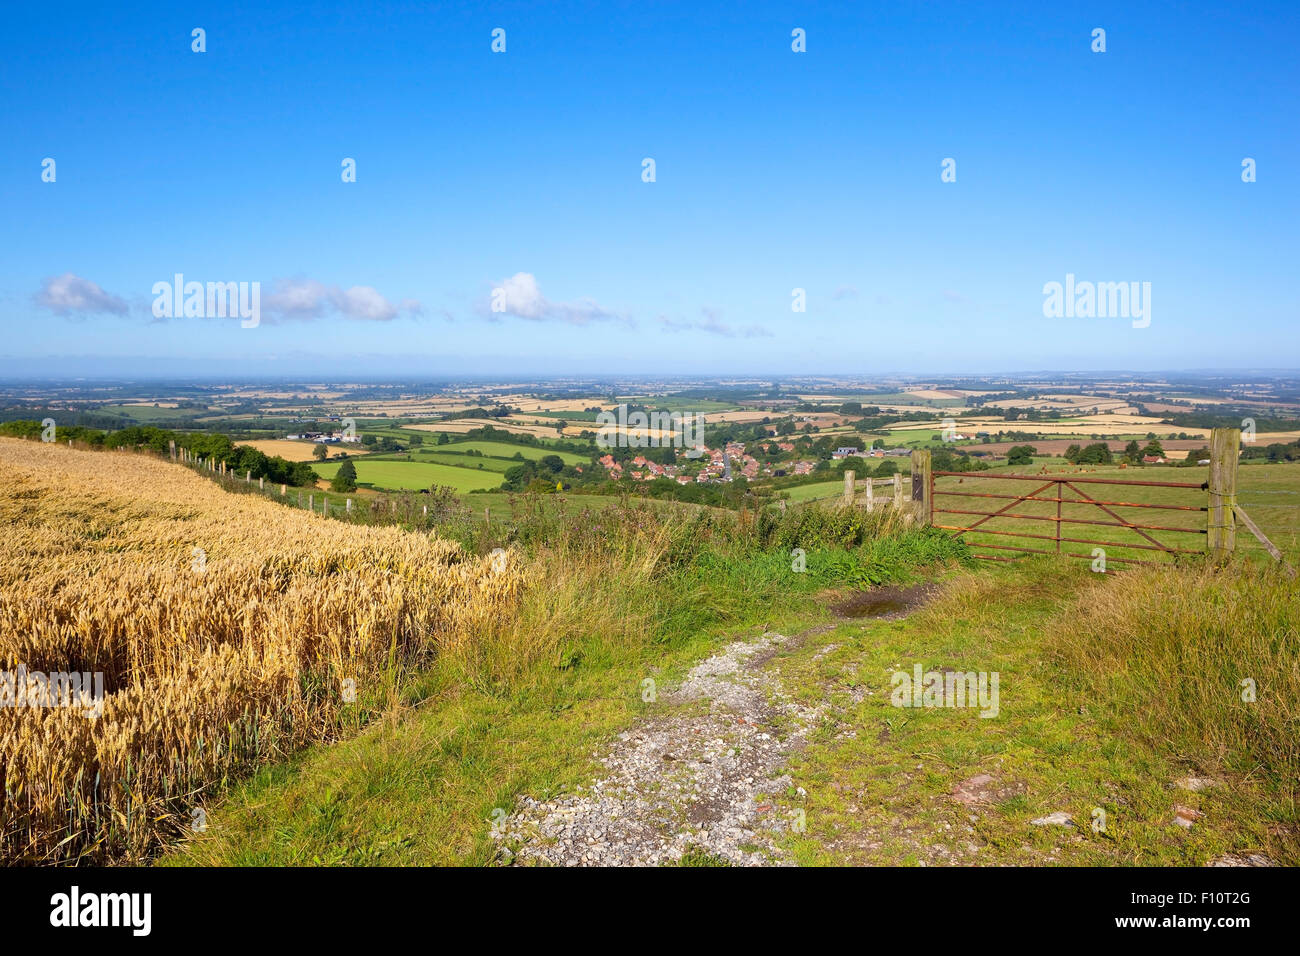 Patchwork landscape of the Vale of York viewed from high on the Yorkshire wolds above the village of Acklam in August. Stock Photo